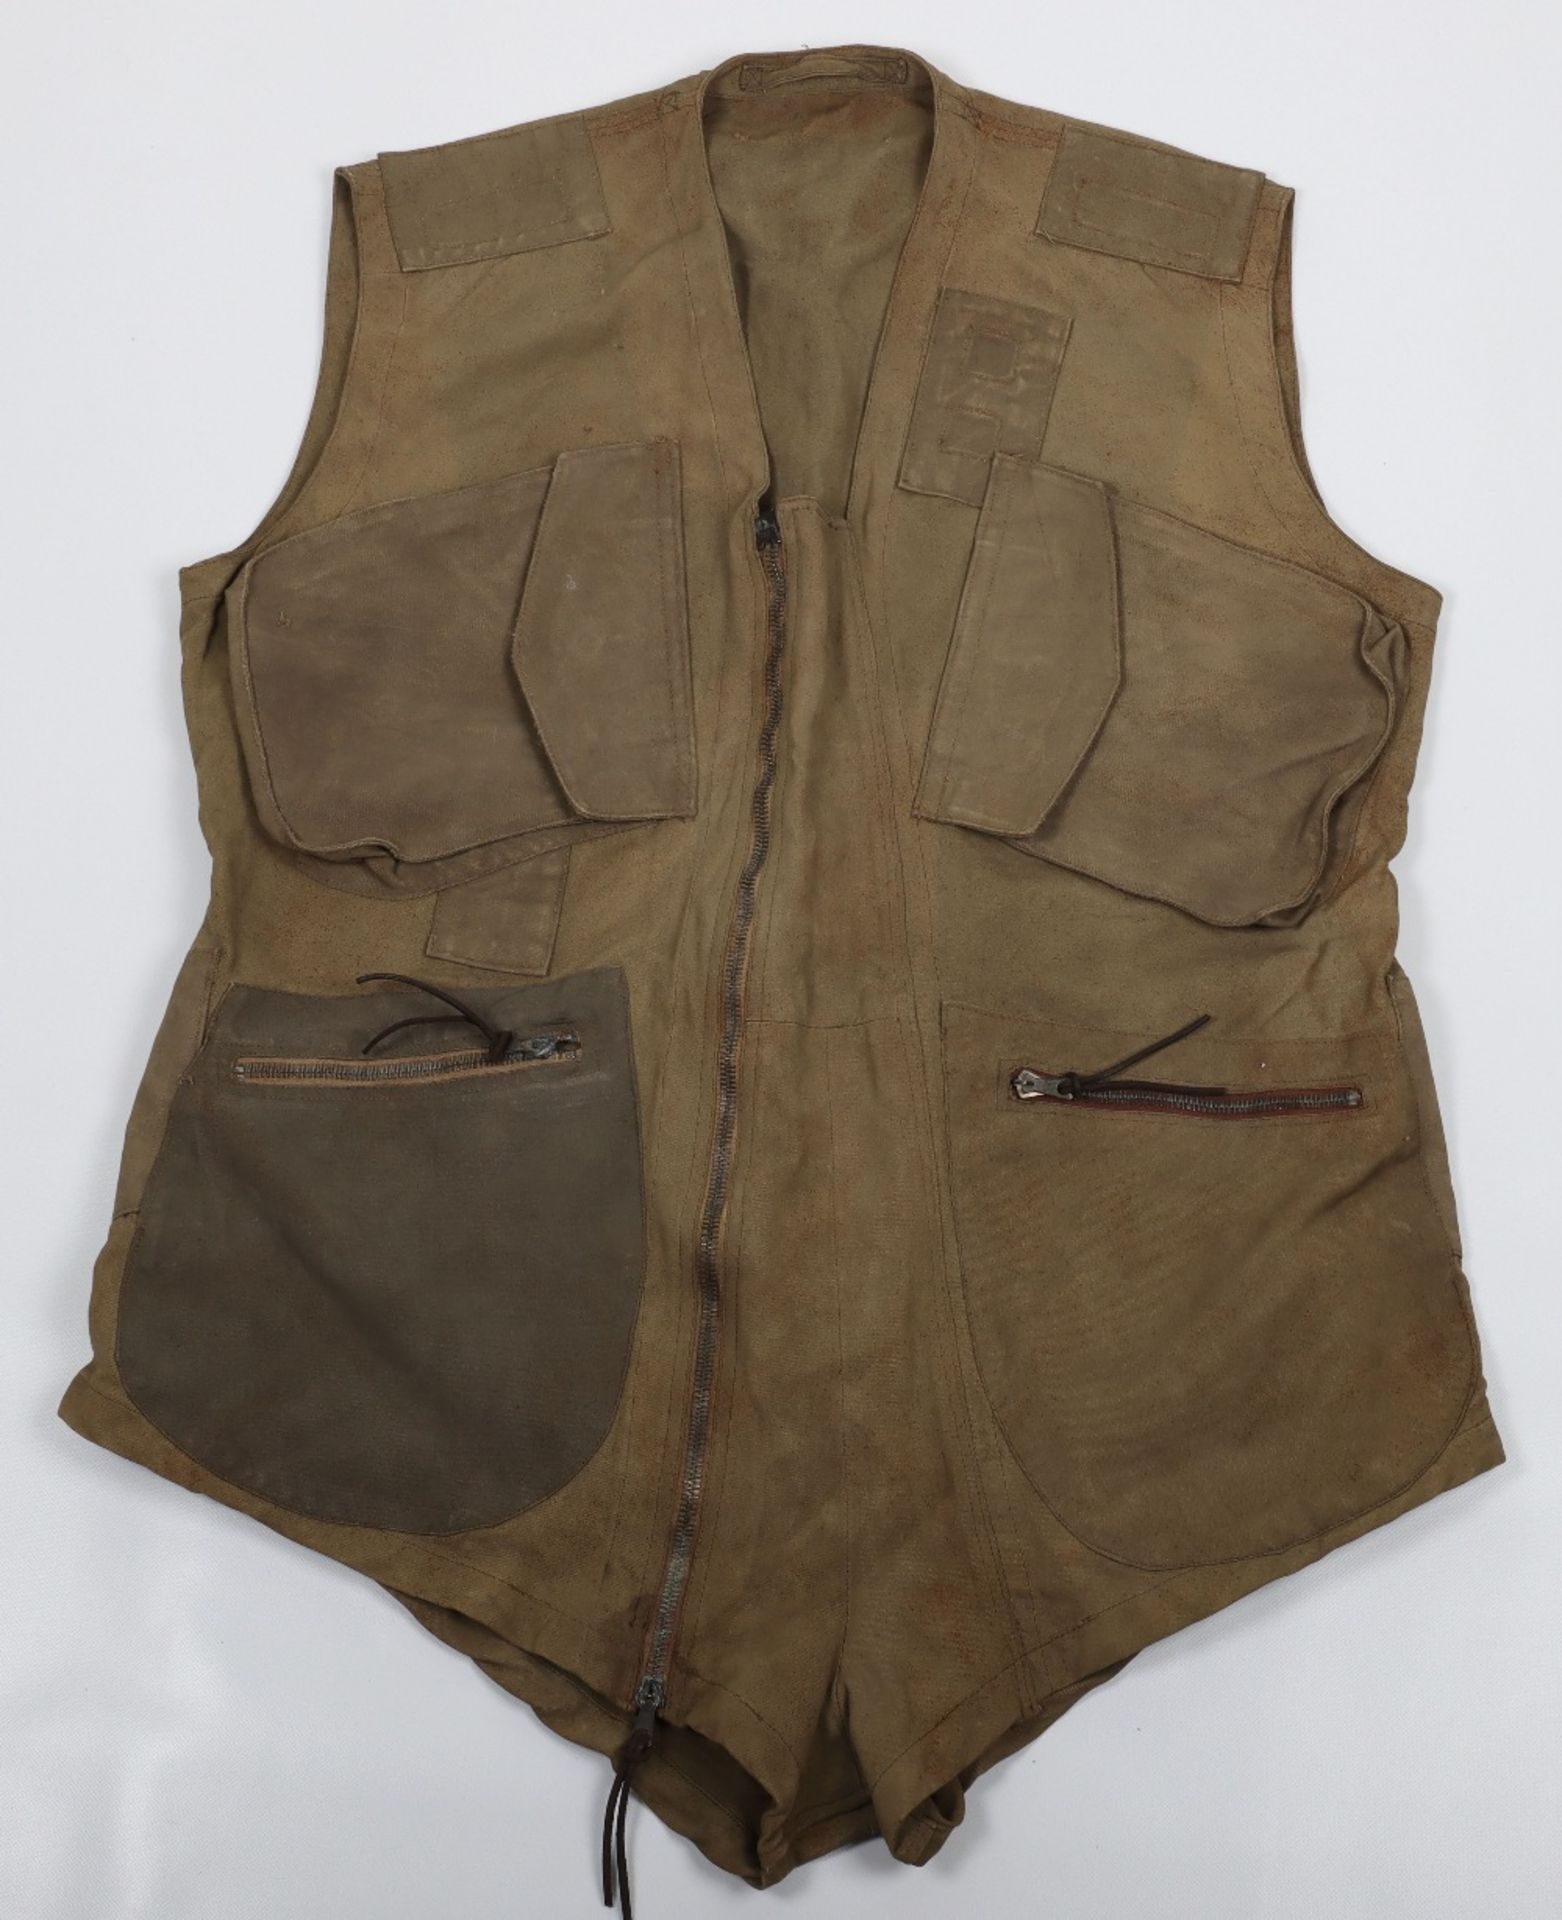 Rare Modified Irvin Jump Jacket Smock Used by the Polish Airborne Forces - Image 13 of 15